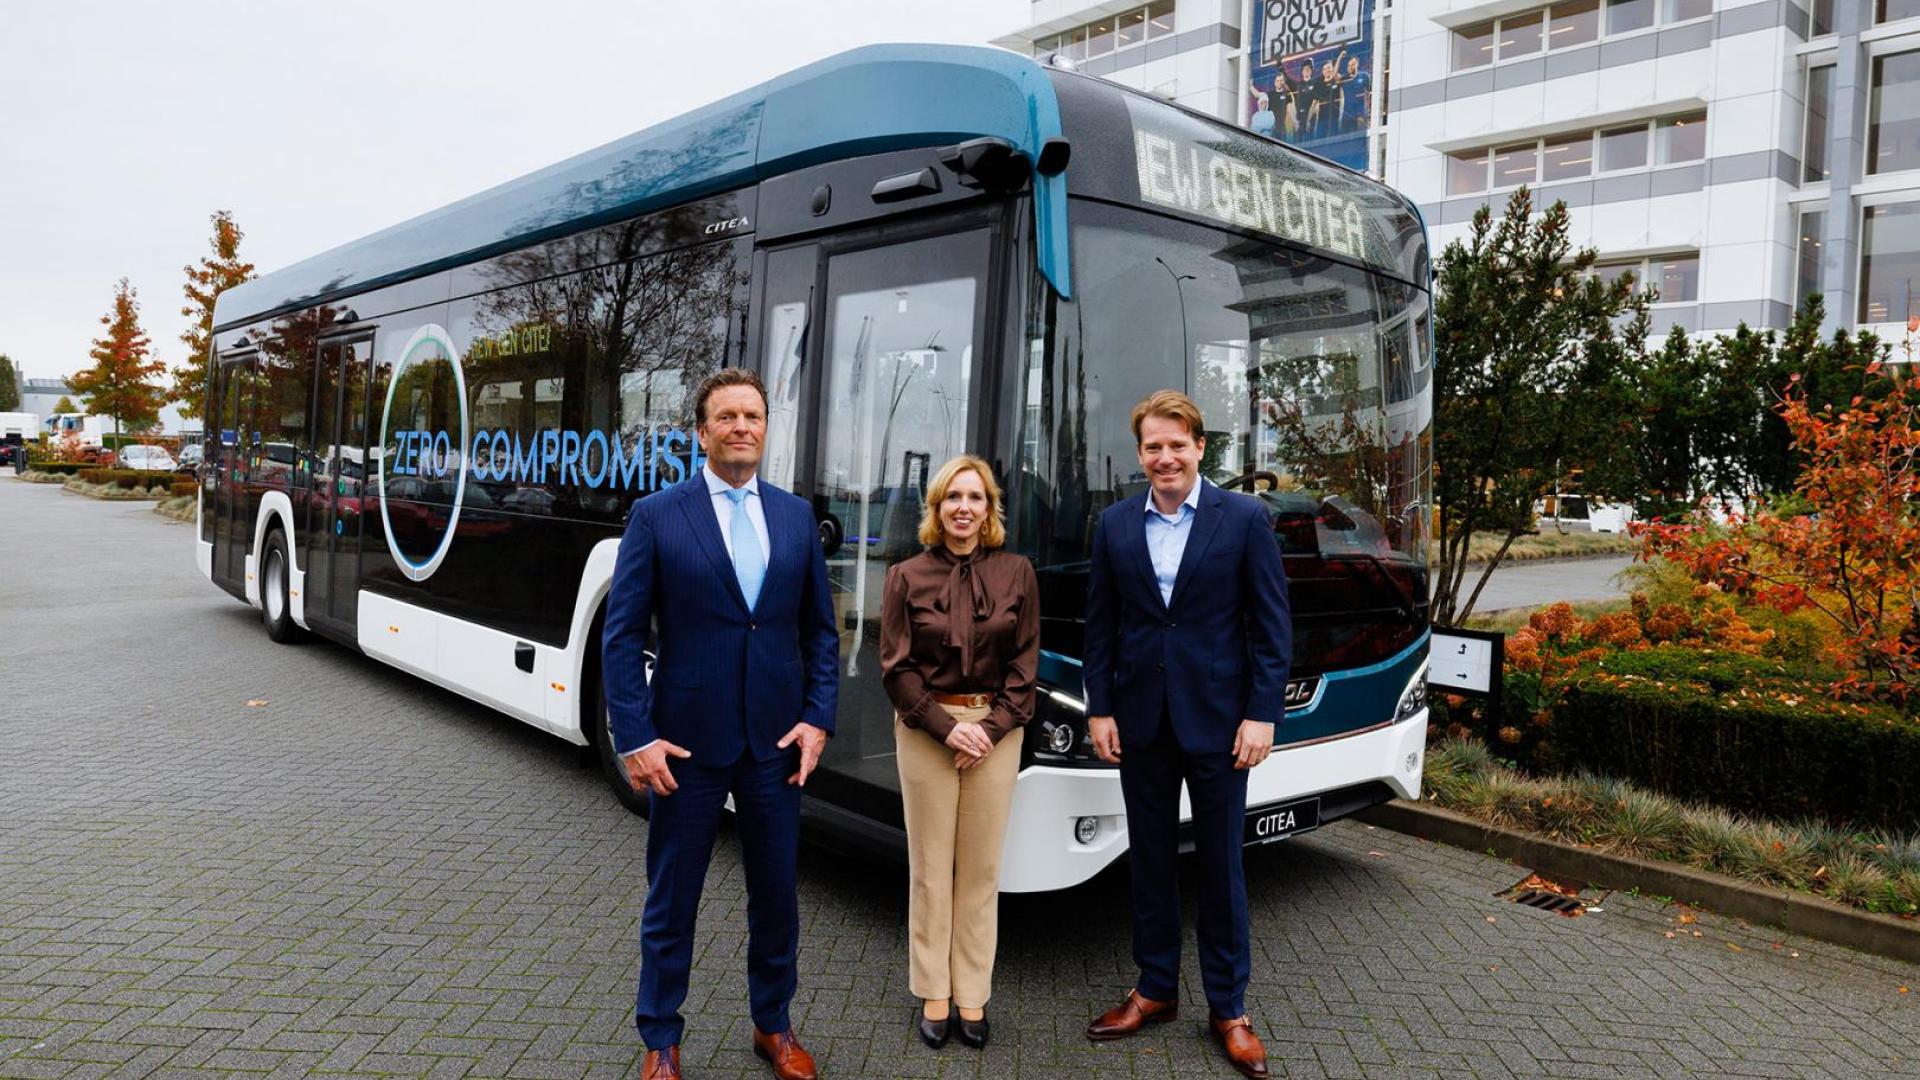 Further greening of public transport by province of North Brabant and Arriva with 64 new-generation VDL Citeas